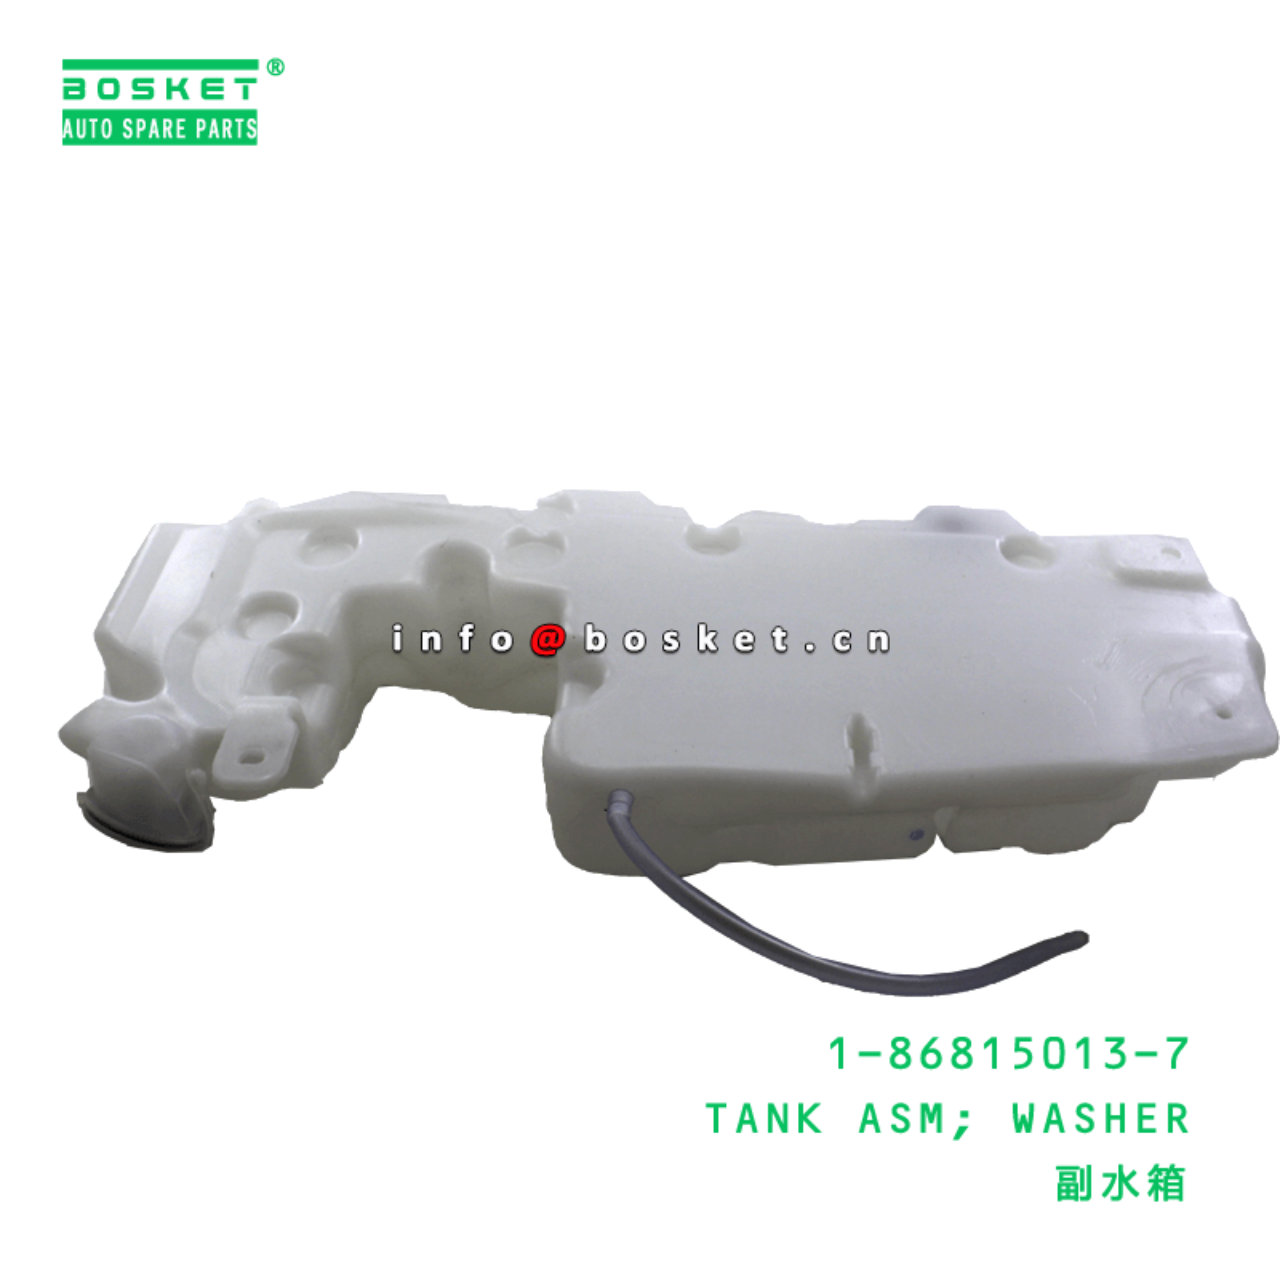  1-86815013-7 Washer Tank Assembly 1868150137 Suitable for ISUZU FRR